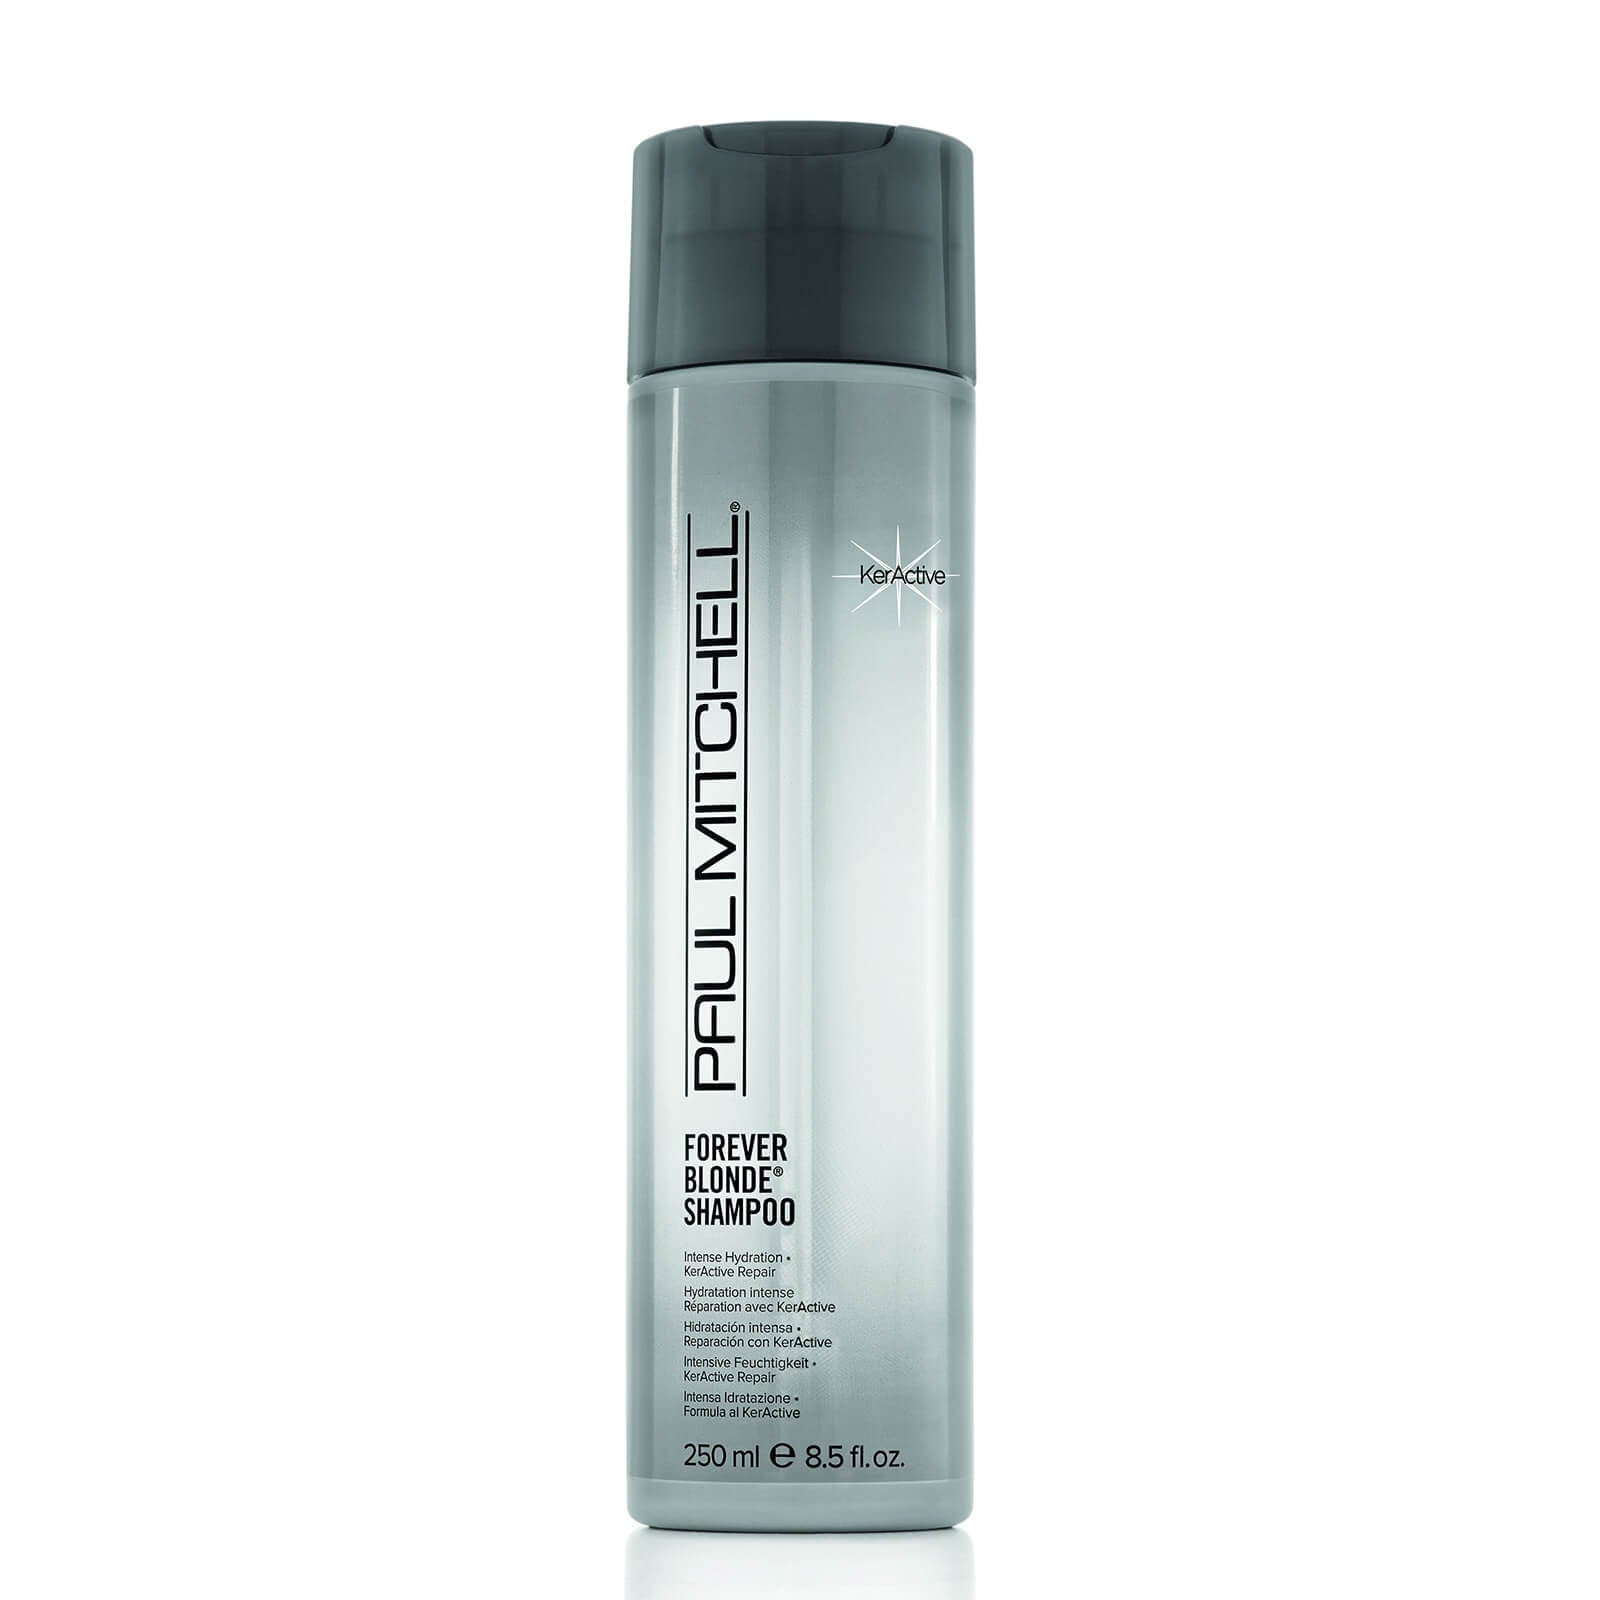 Paul Mitchell Forever blonde shampoo